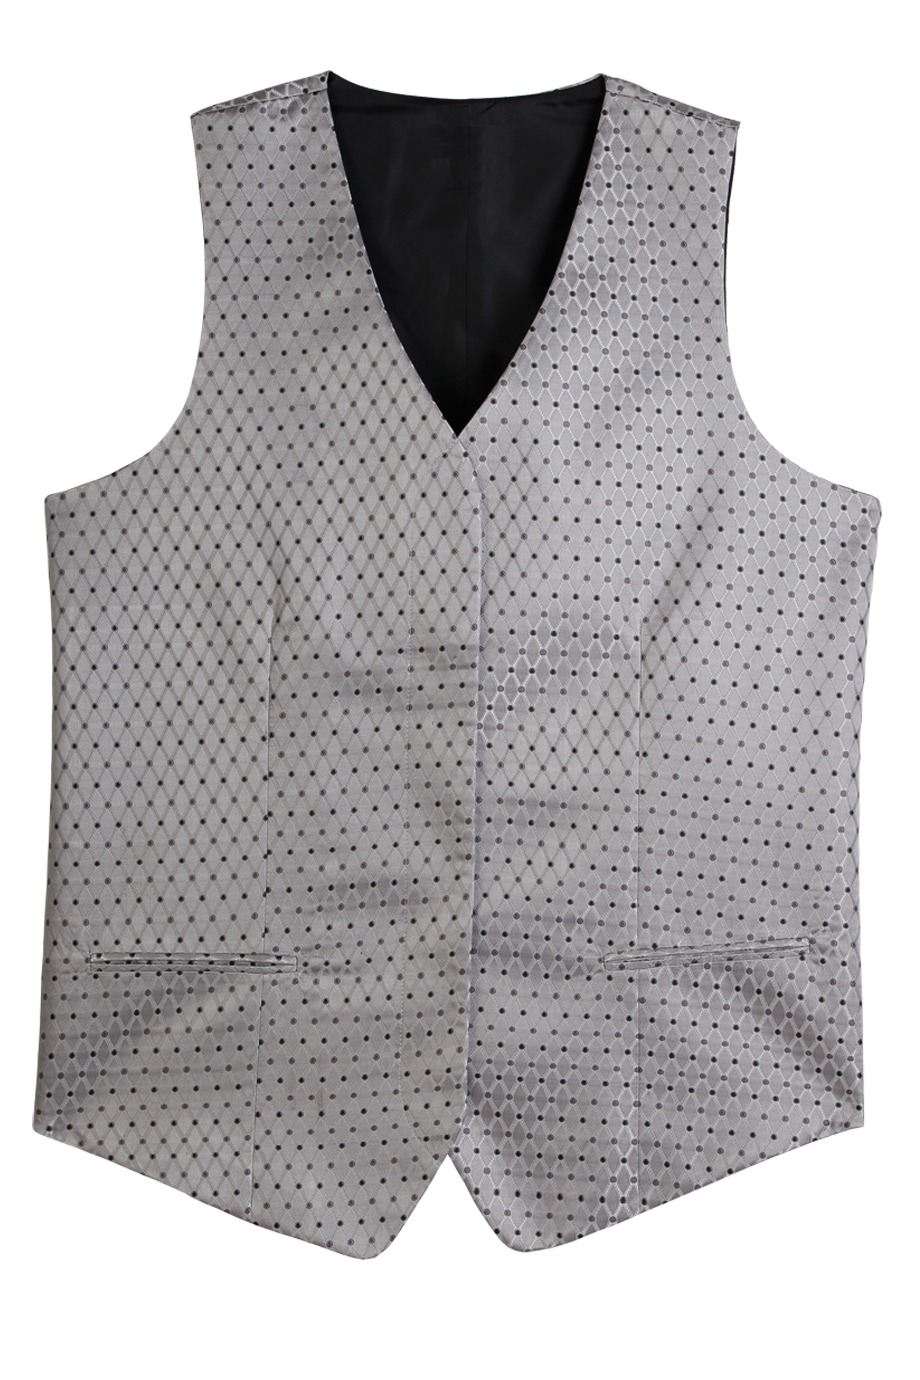 Edwards Garment 7497 - Ladies Fly Front Diamonds And Vest Dots